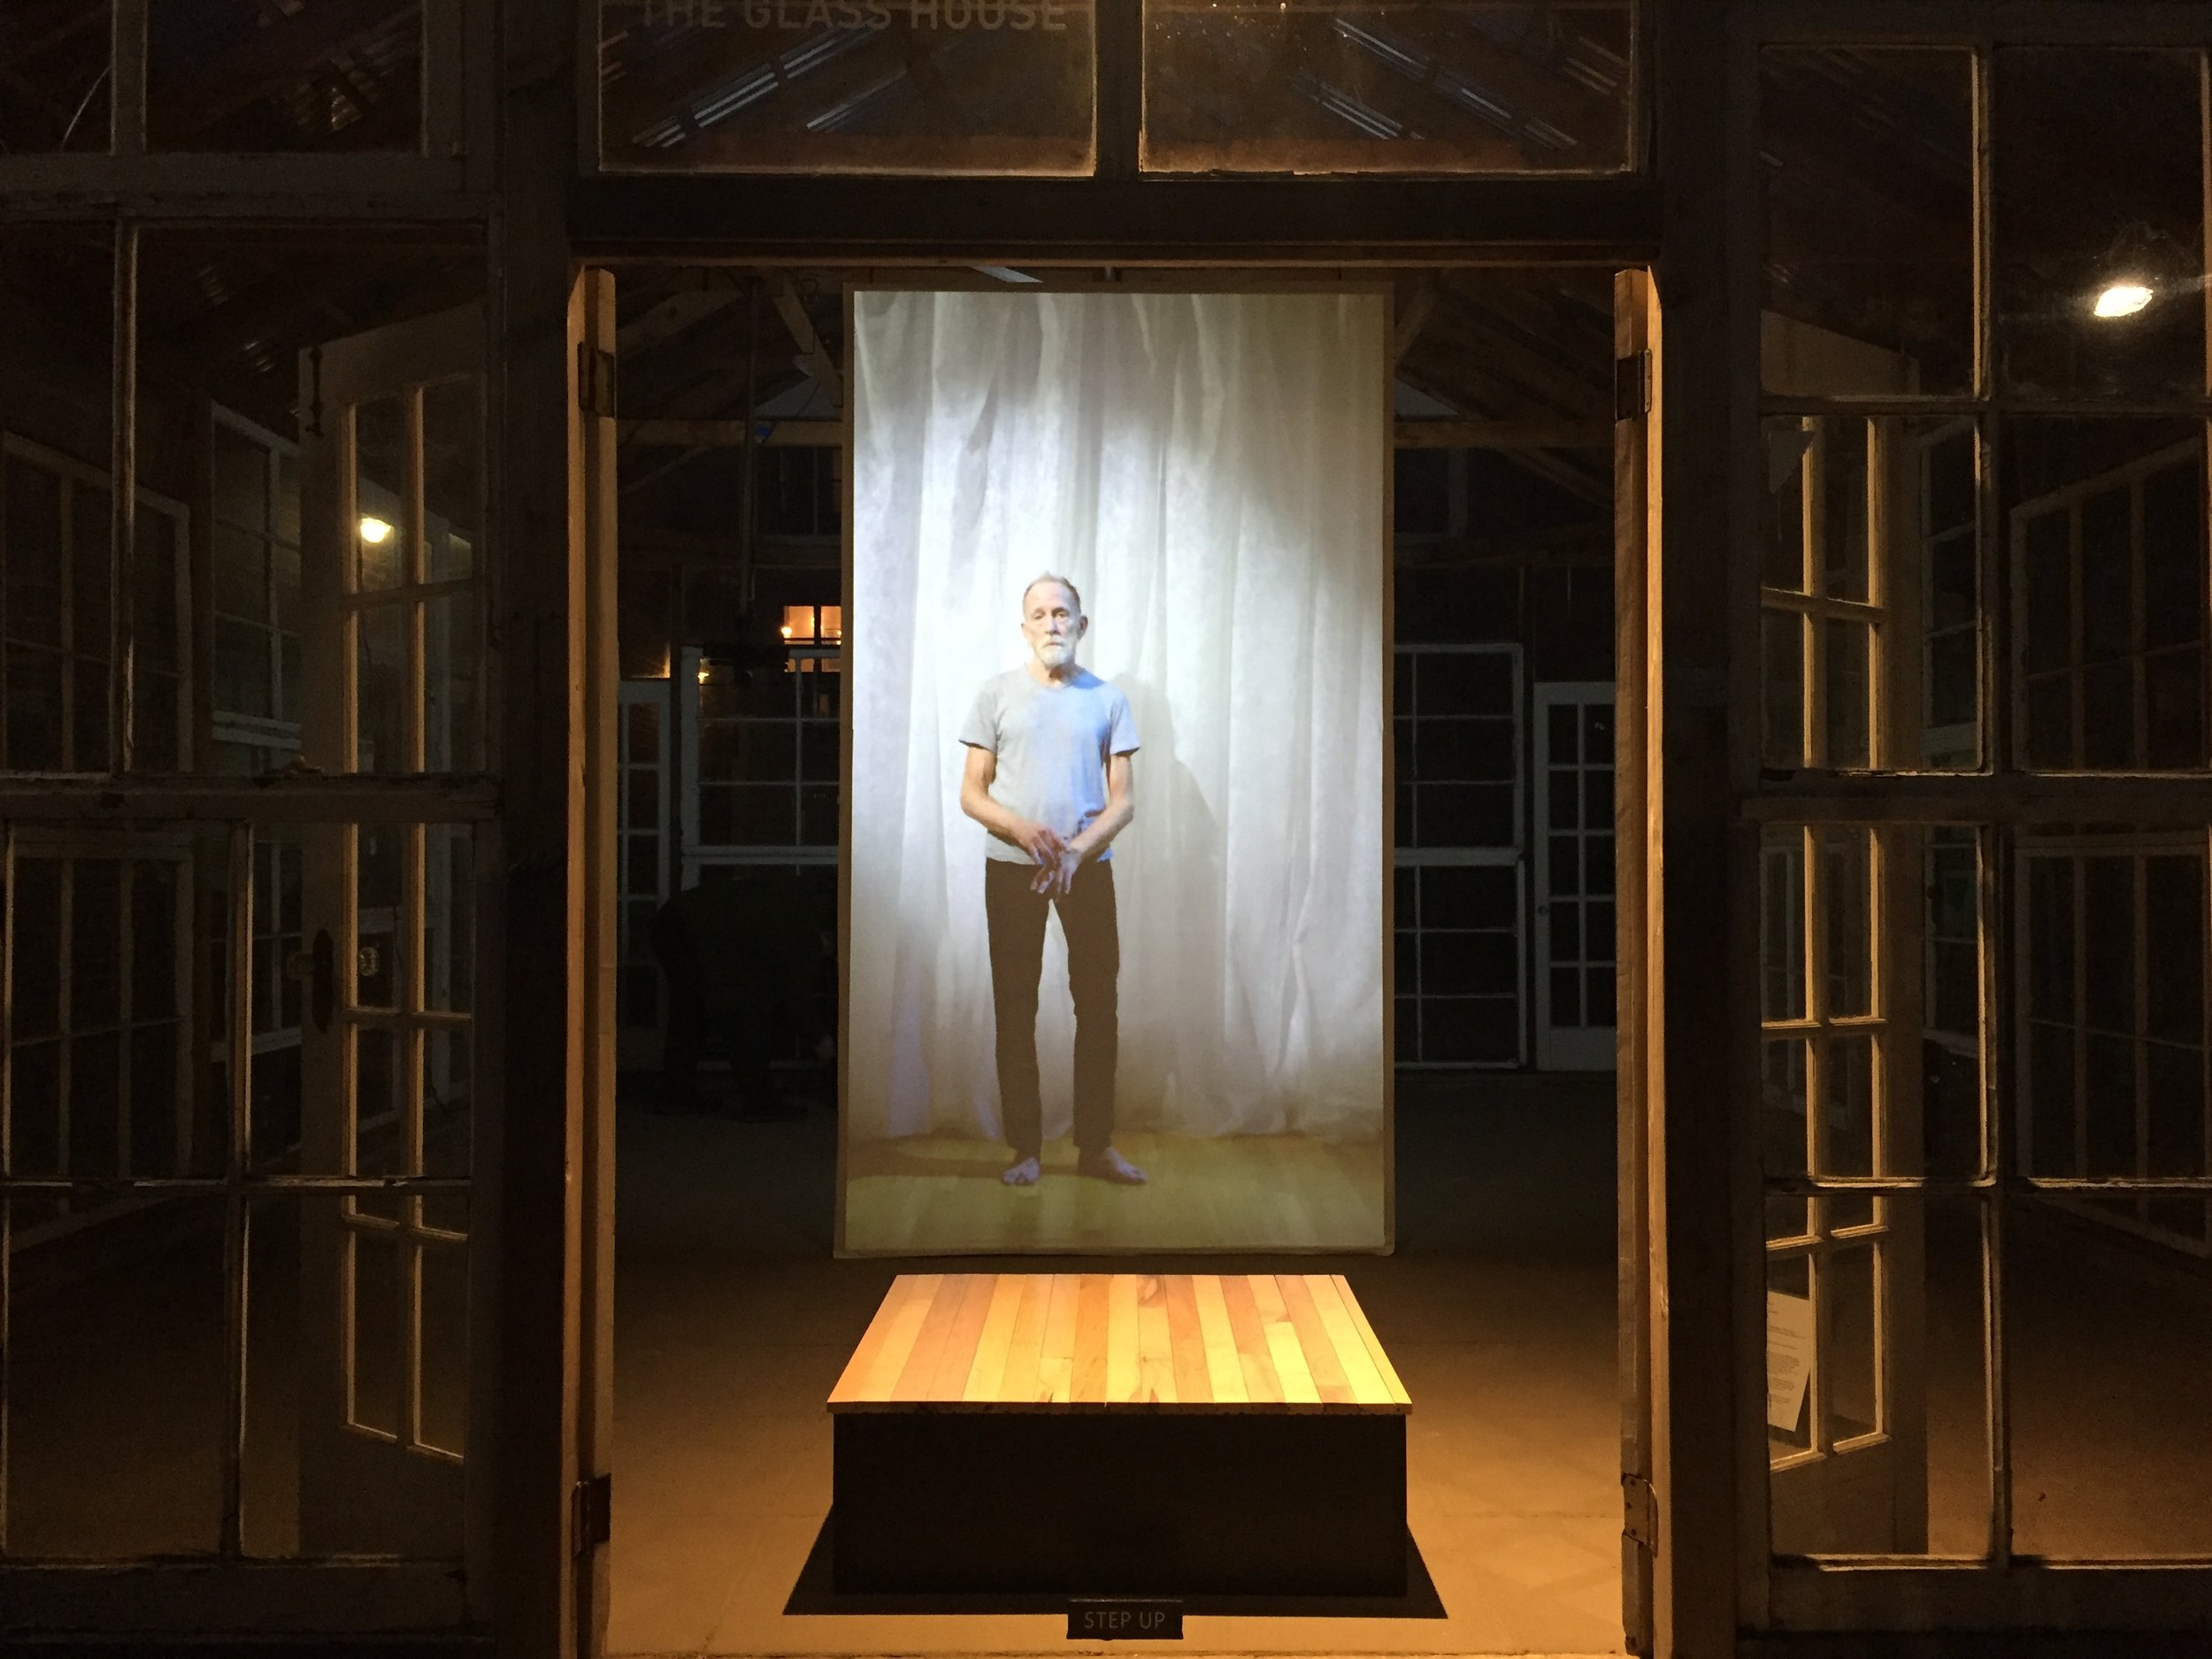 A projection of a performer standing in front of a white curtain hangs by a small square platform inside a glass house at night.